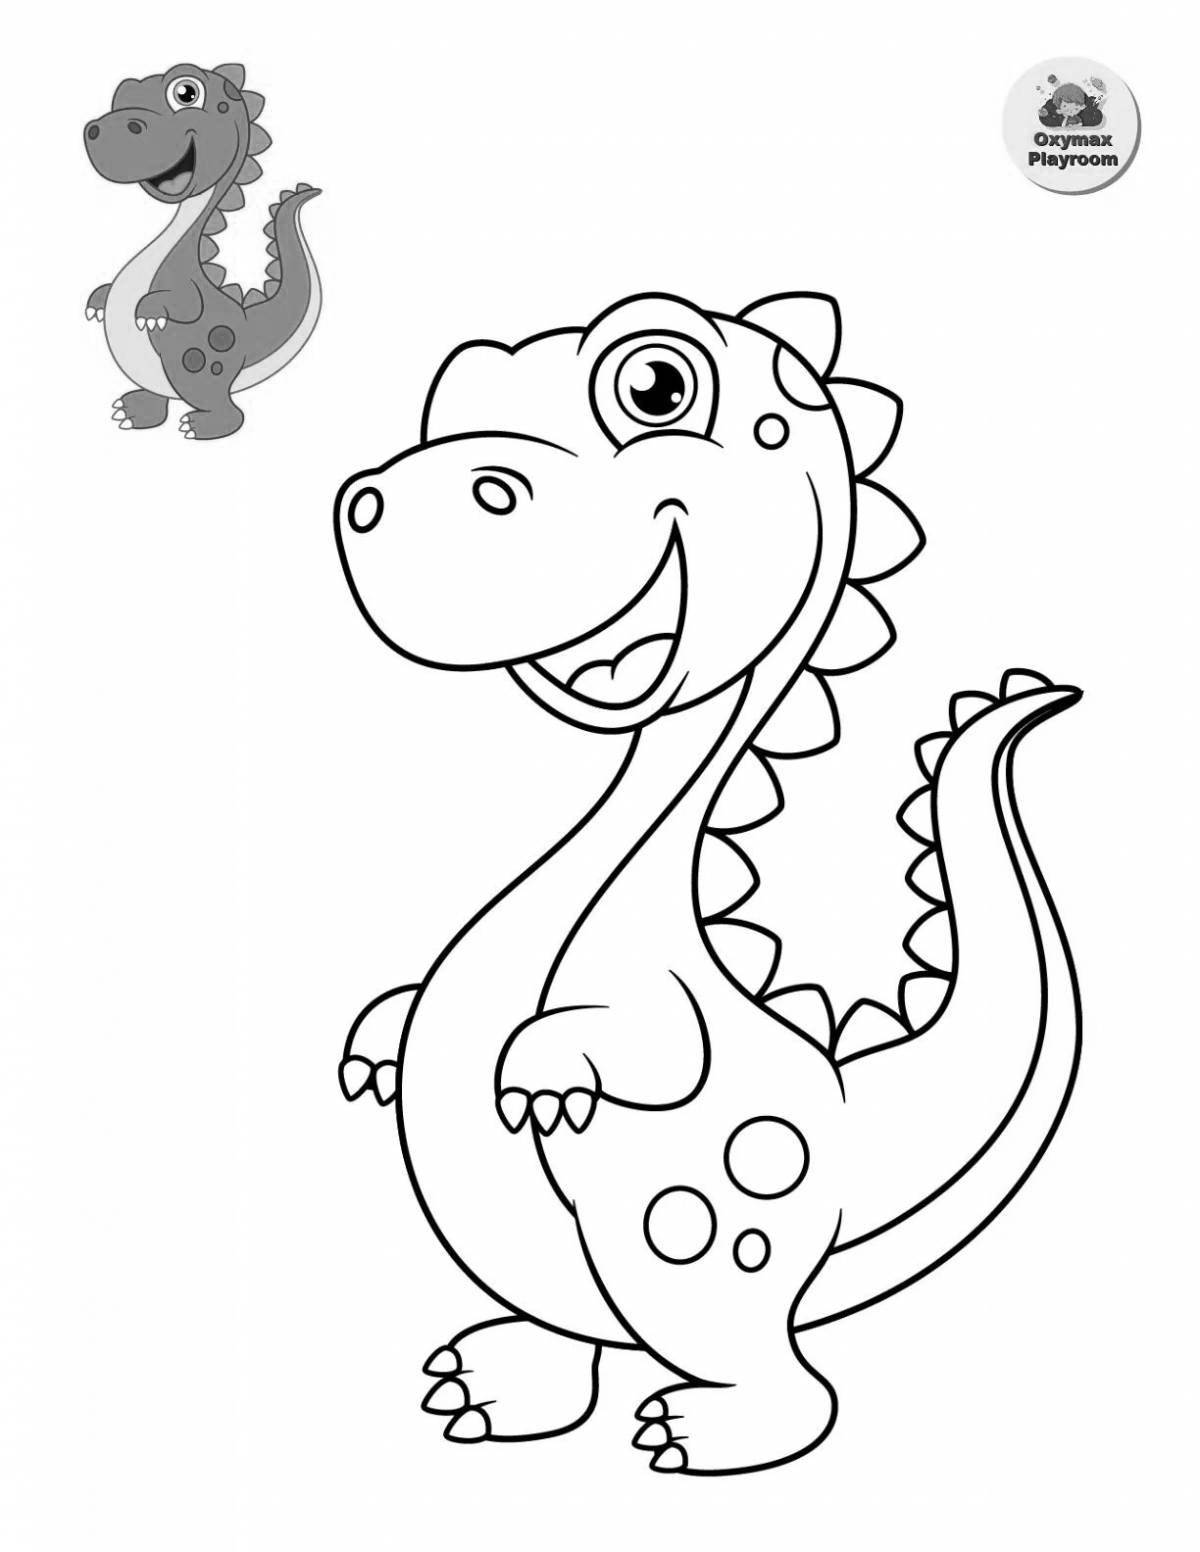 Colorful and playful dinosaur coloring page for kids